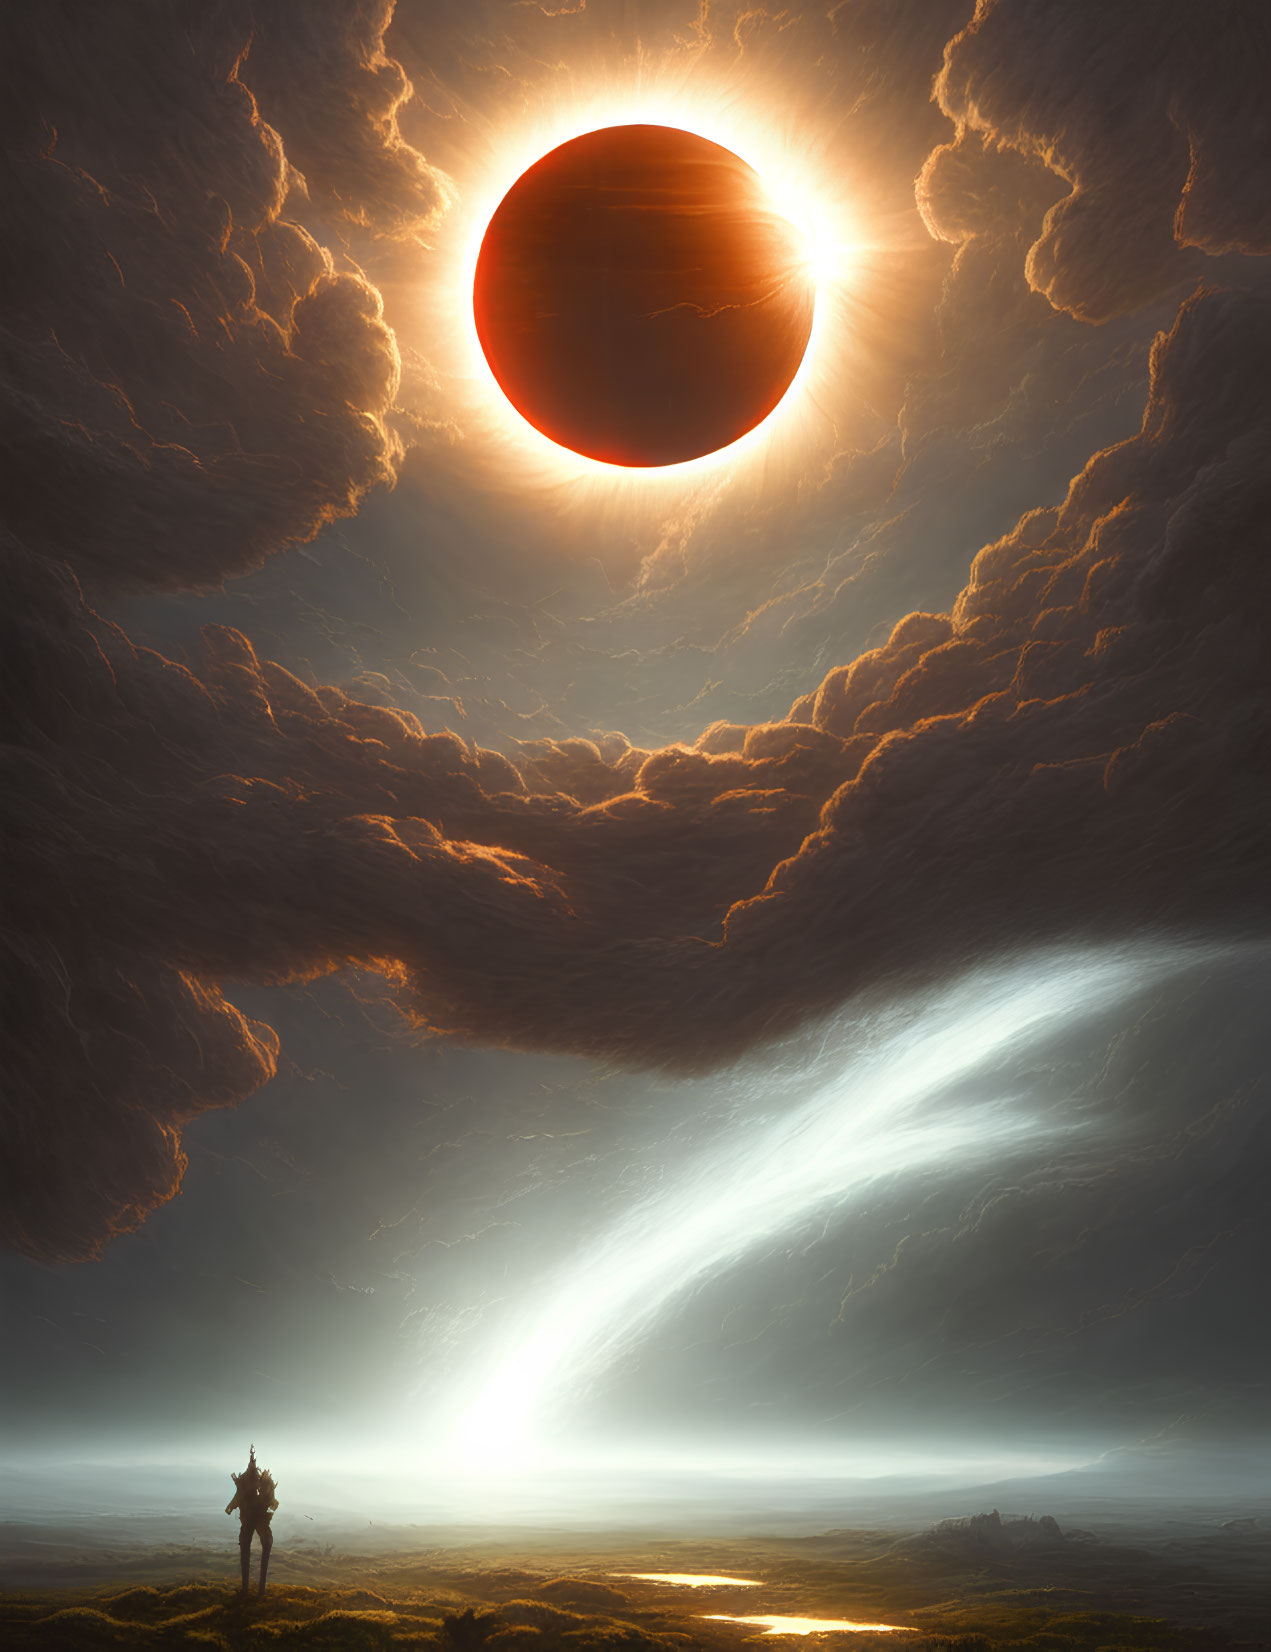 Person under dramatic sky with red eclipse and beam of light over golden landscape